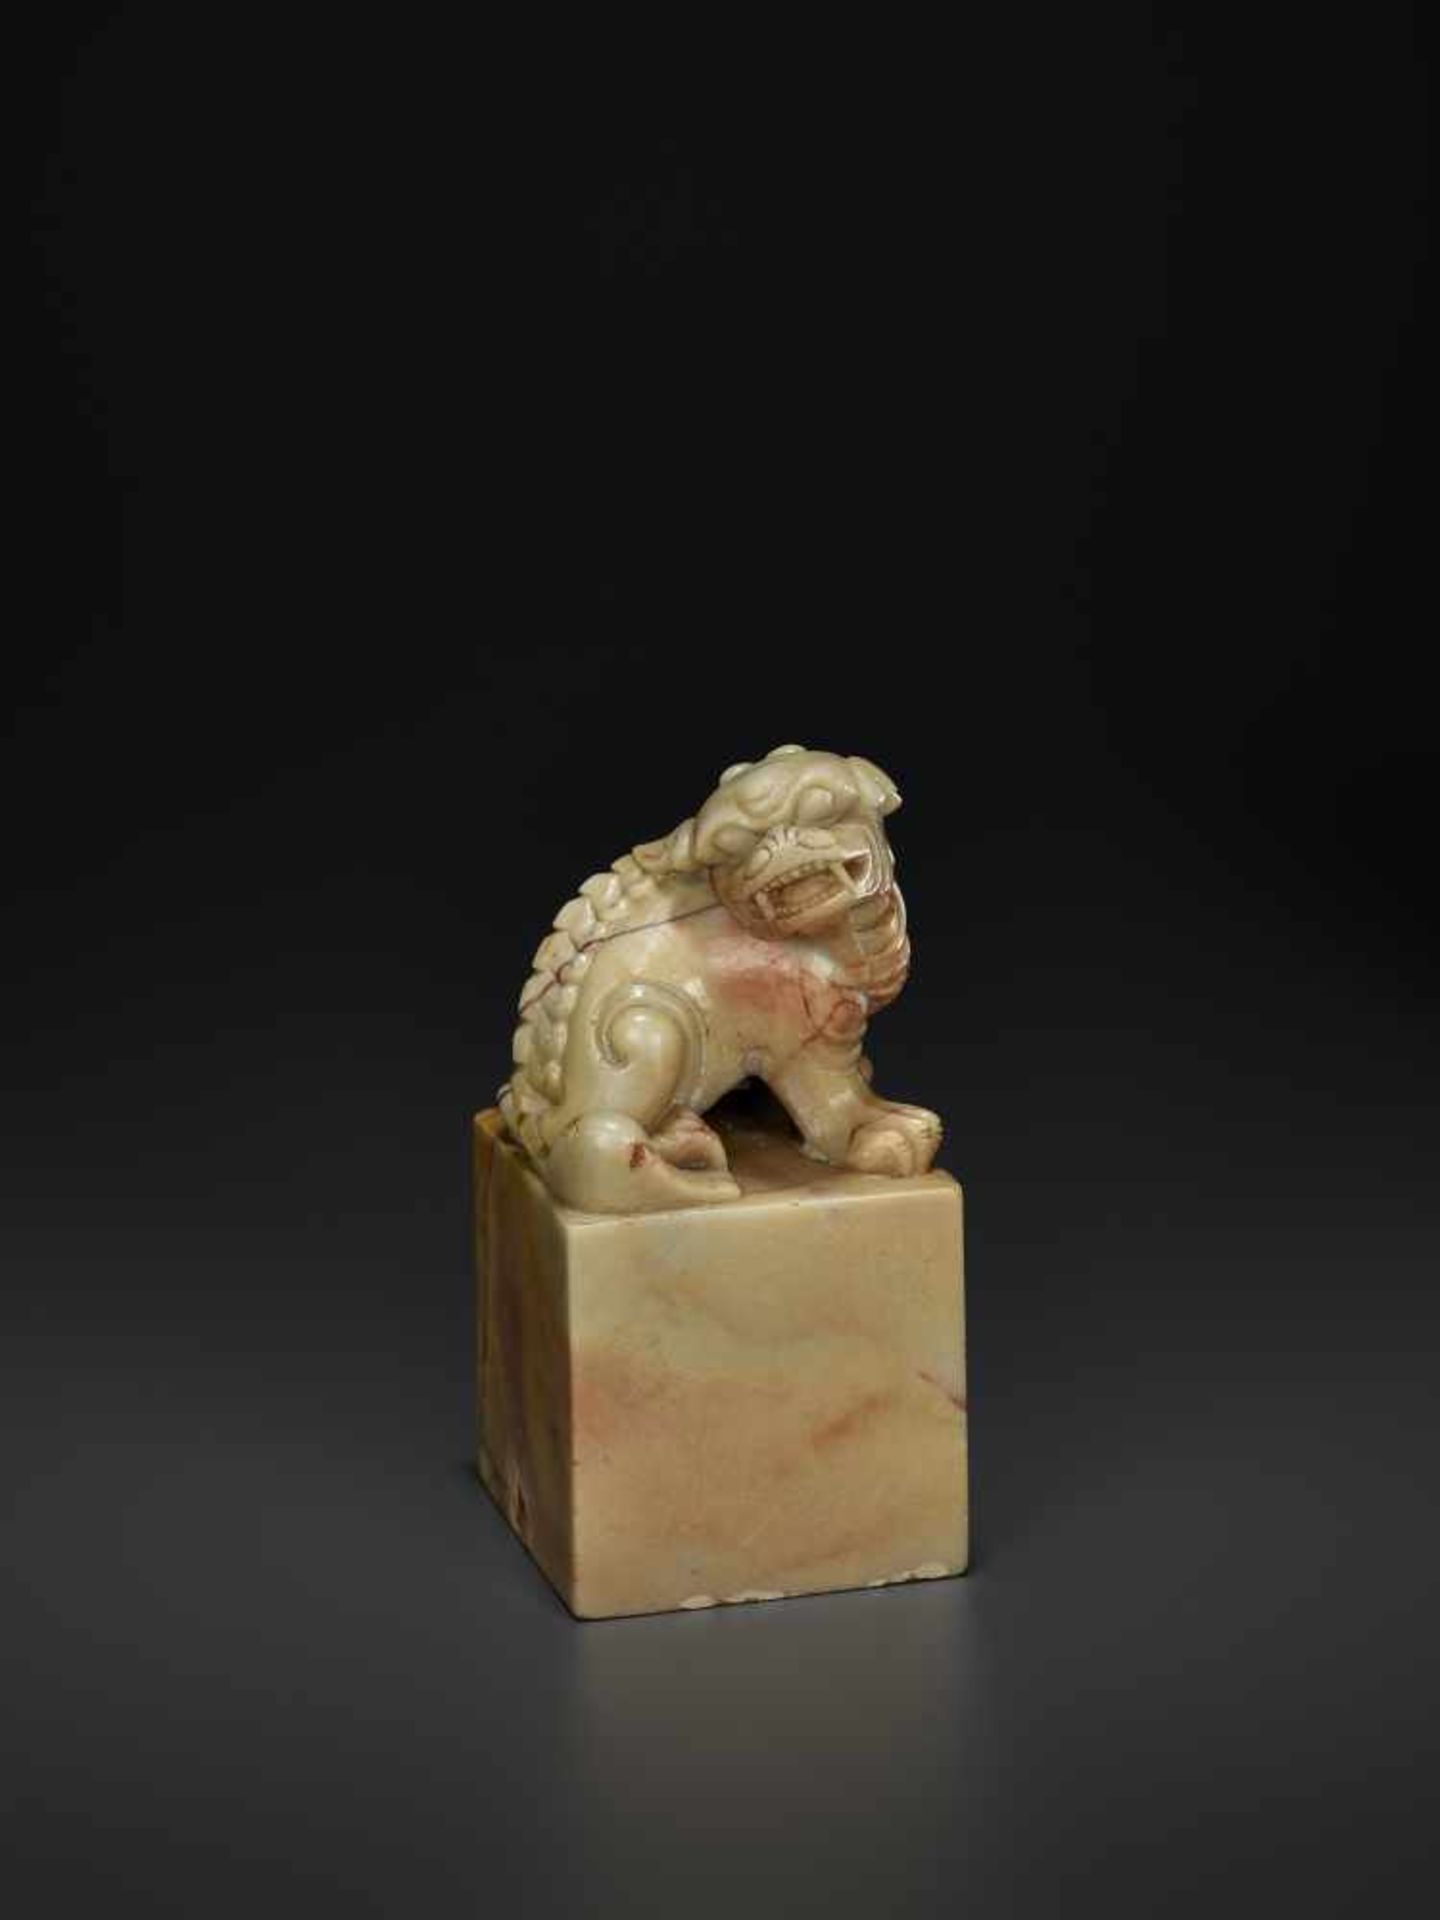 A LARGE SOAPSTONE SEAL, QINGChina, 1780-1860. Openwork carving with a Buddhist lion sitting on a - Image 4 of 8